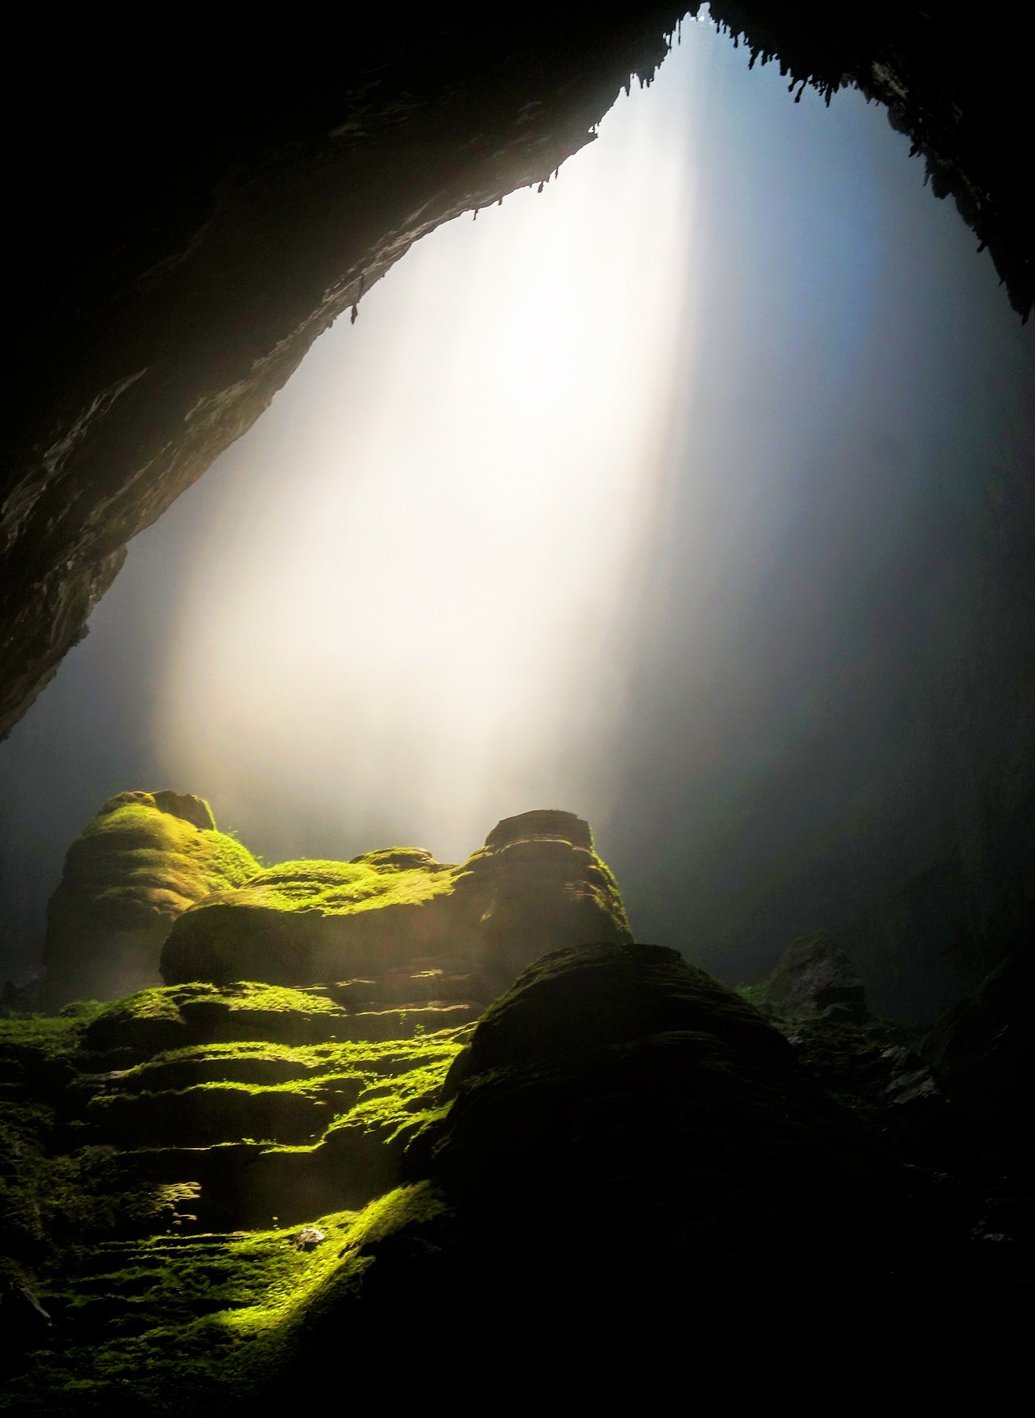 Shafts of light piercing through the opening of a cave onto moss-covered rocks, symbolizing the Druidic belief in the soul's immortal journey to the Otherworld.